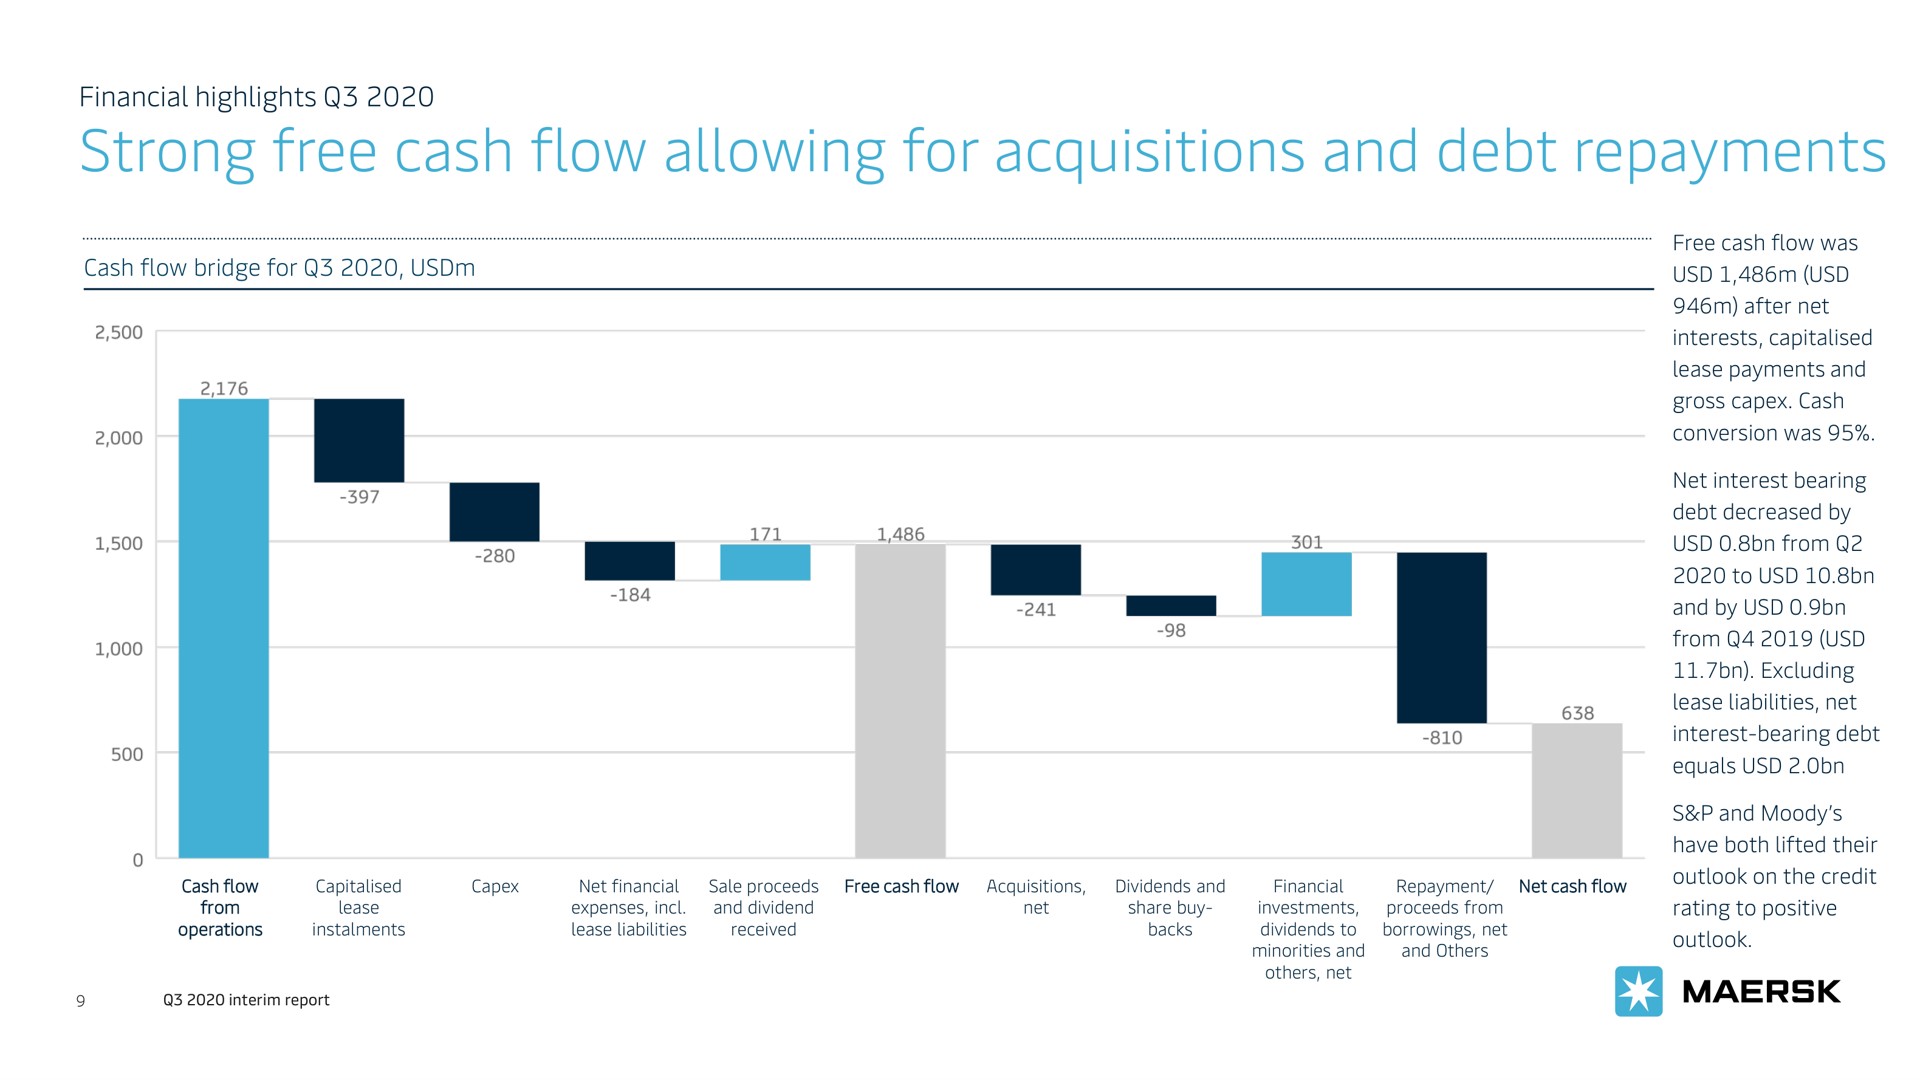 strong free cash flow allowing for acquisitions and debt repayments | Maersk